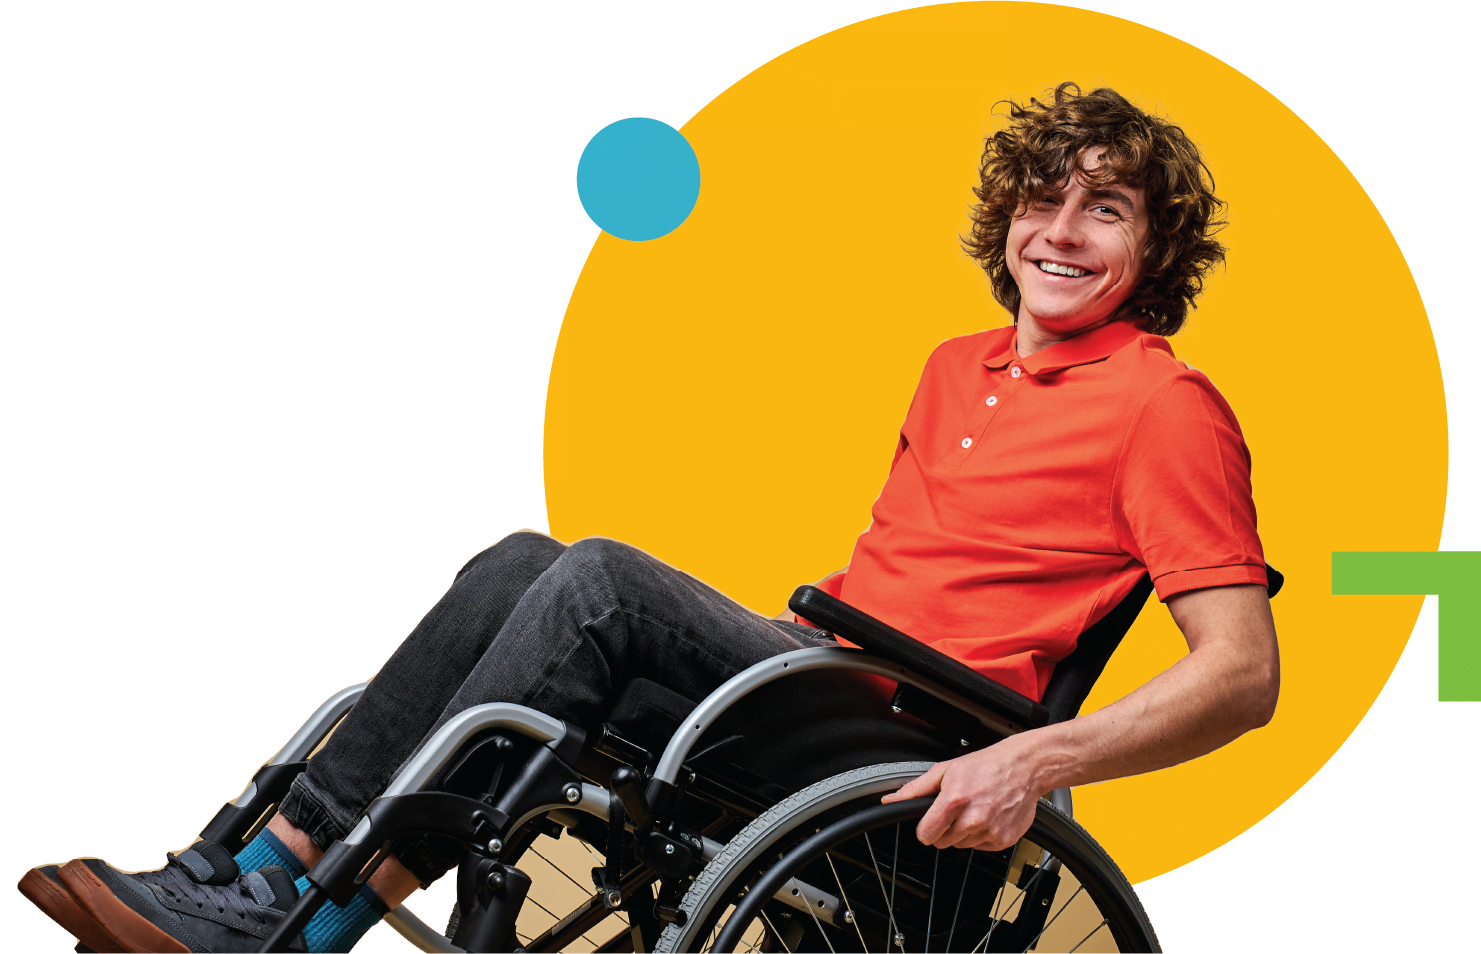 Young man in wheel chair smiling